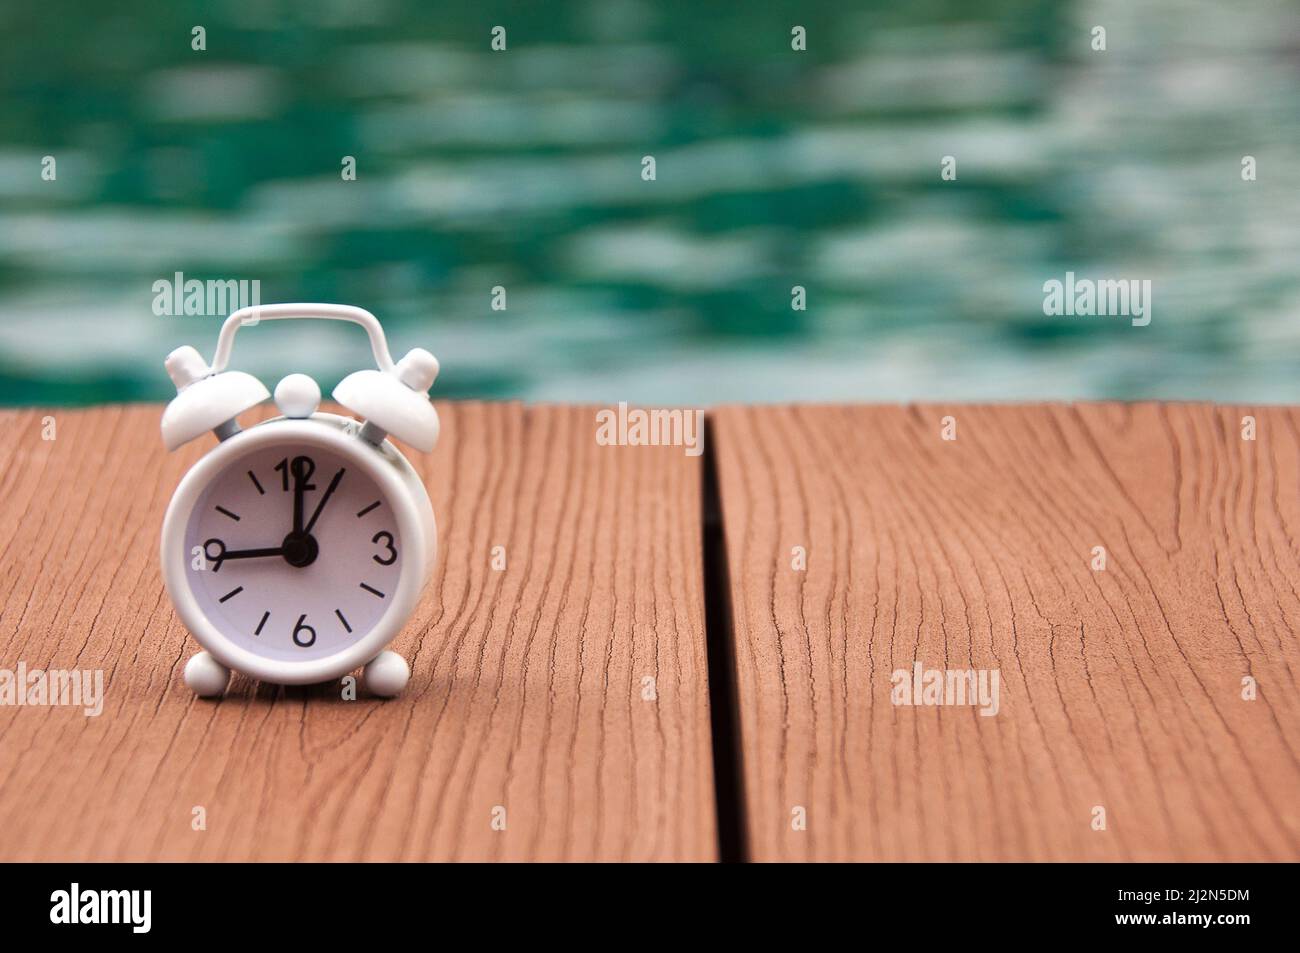 Alarm clock on wooden floor with blurred swimming pool background. The clock set at 9 o'clock. Stock Photo